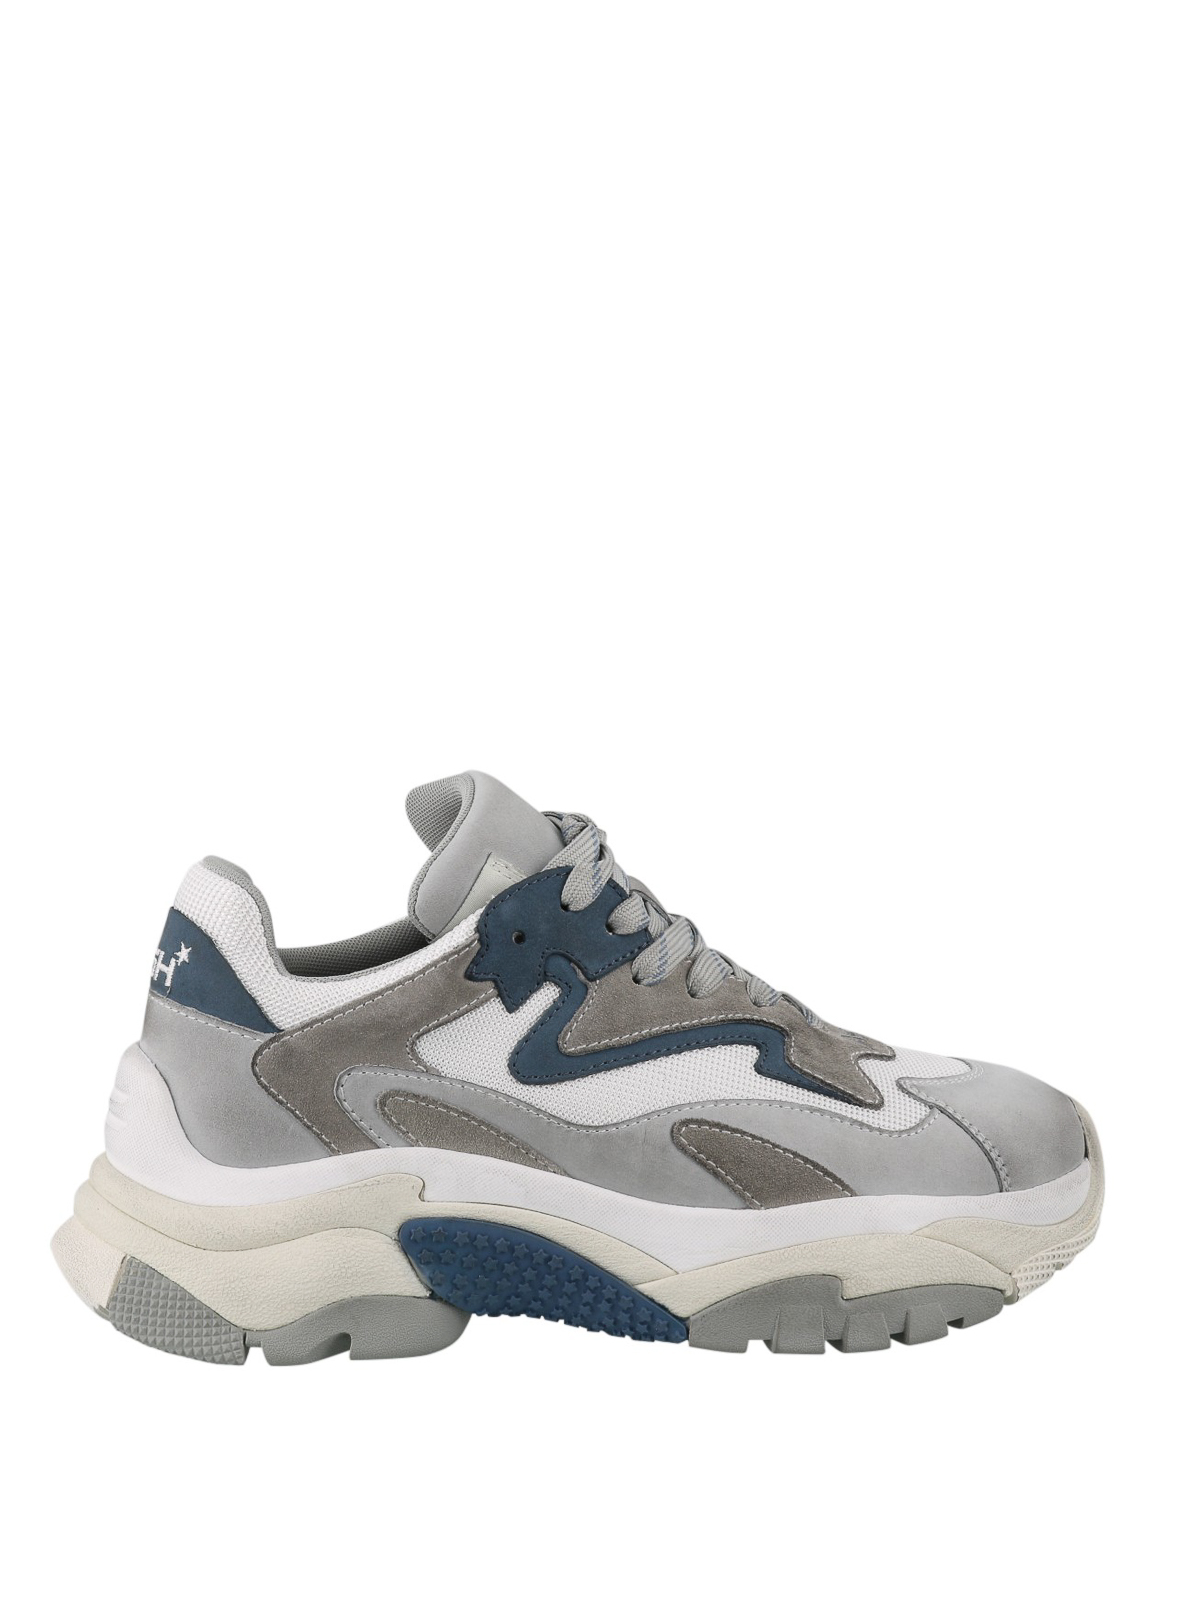 Trainers Ash - Atomic sneakers - ATOMIC05 | Shop online at iKRIX